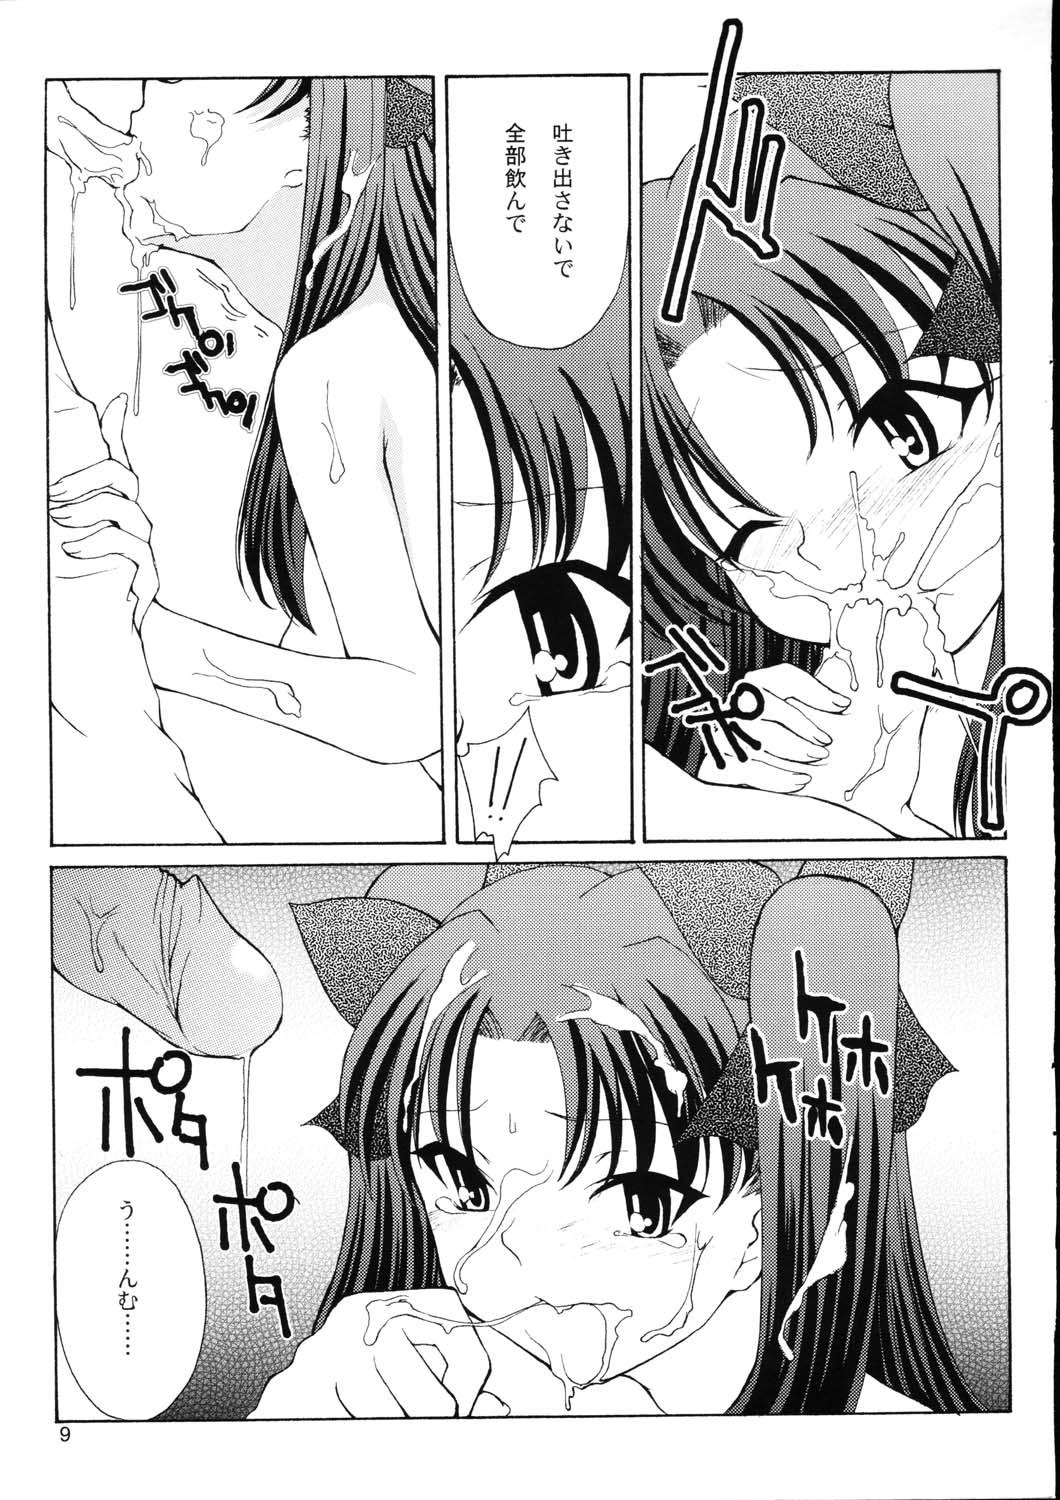 Movie Previous Night - Fate stay night Sexy Sluts - Page 8